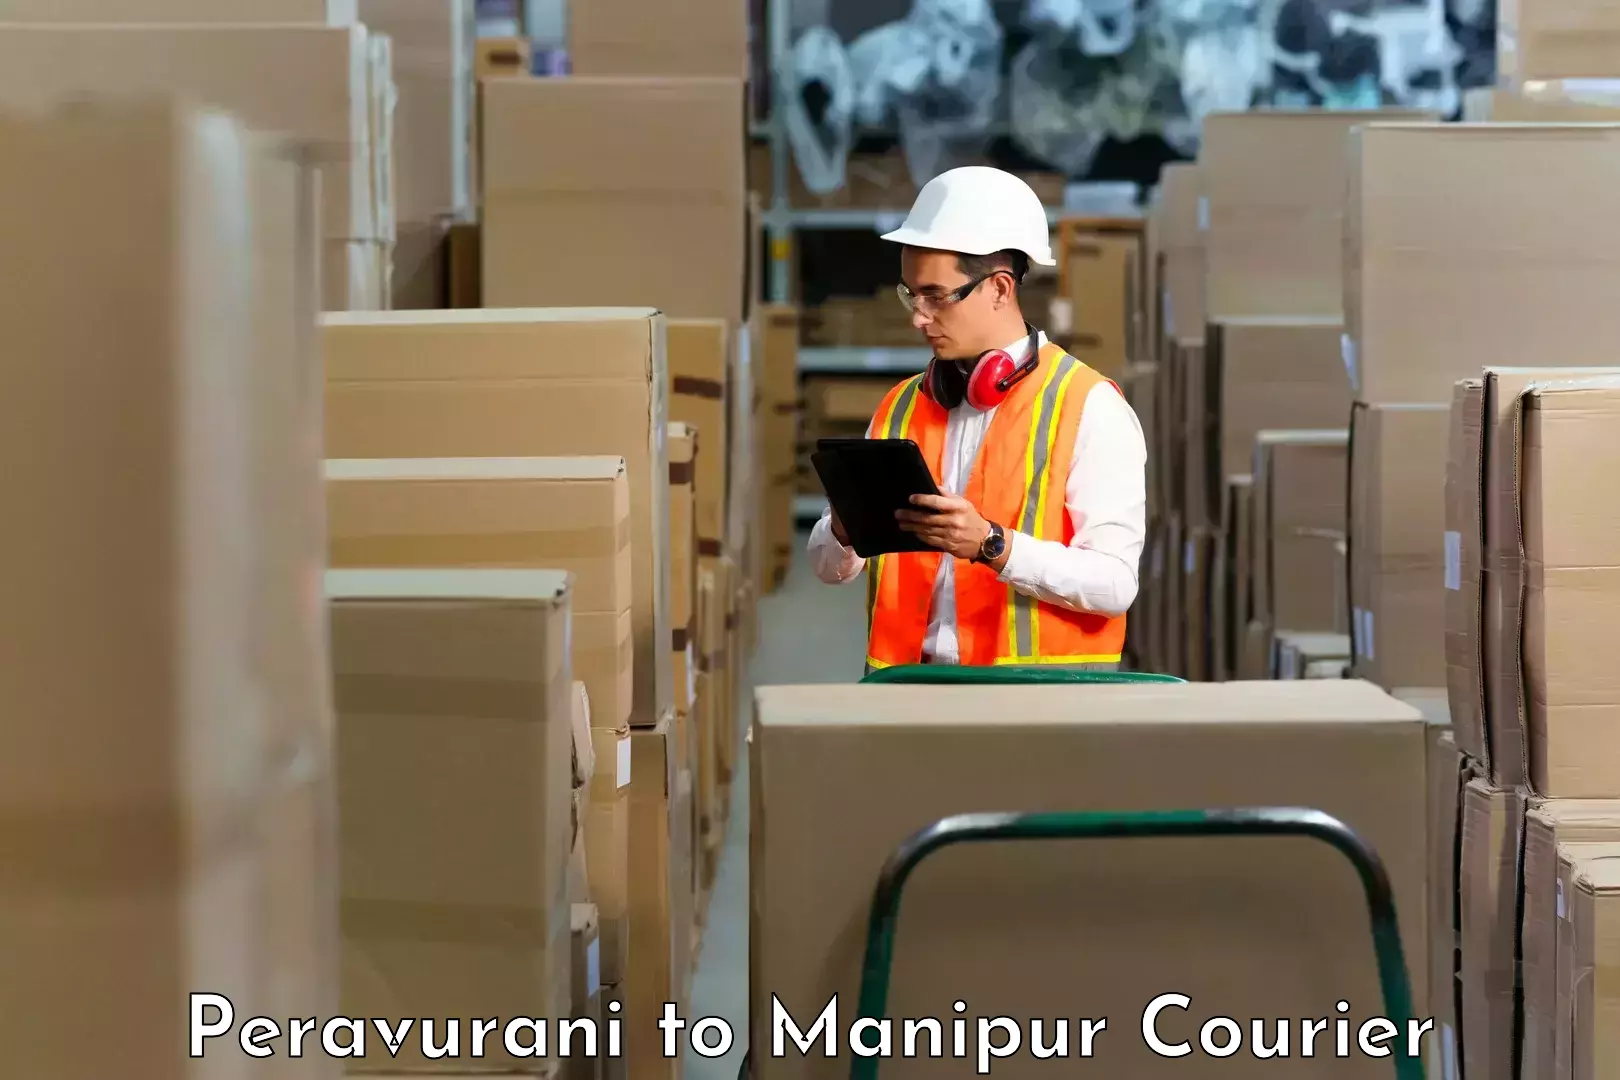 Next-day delivery options Peravurani to Manipur